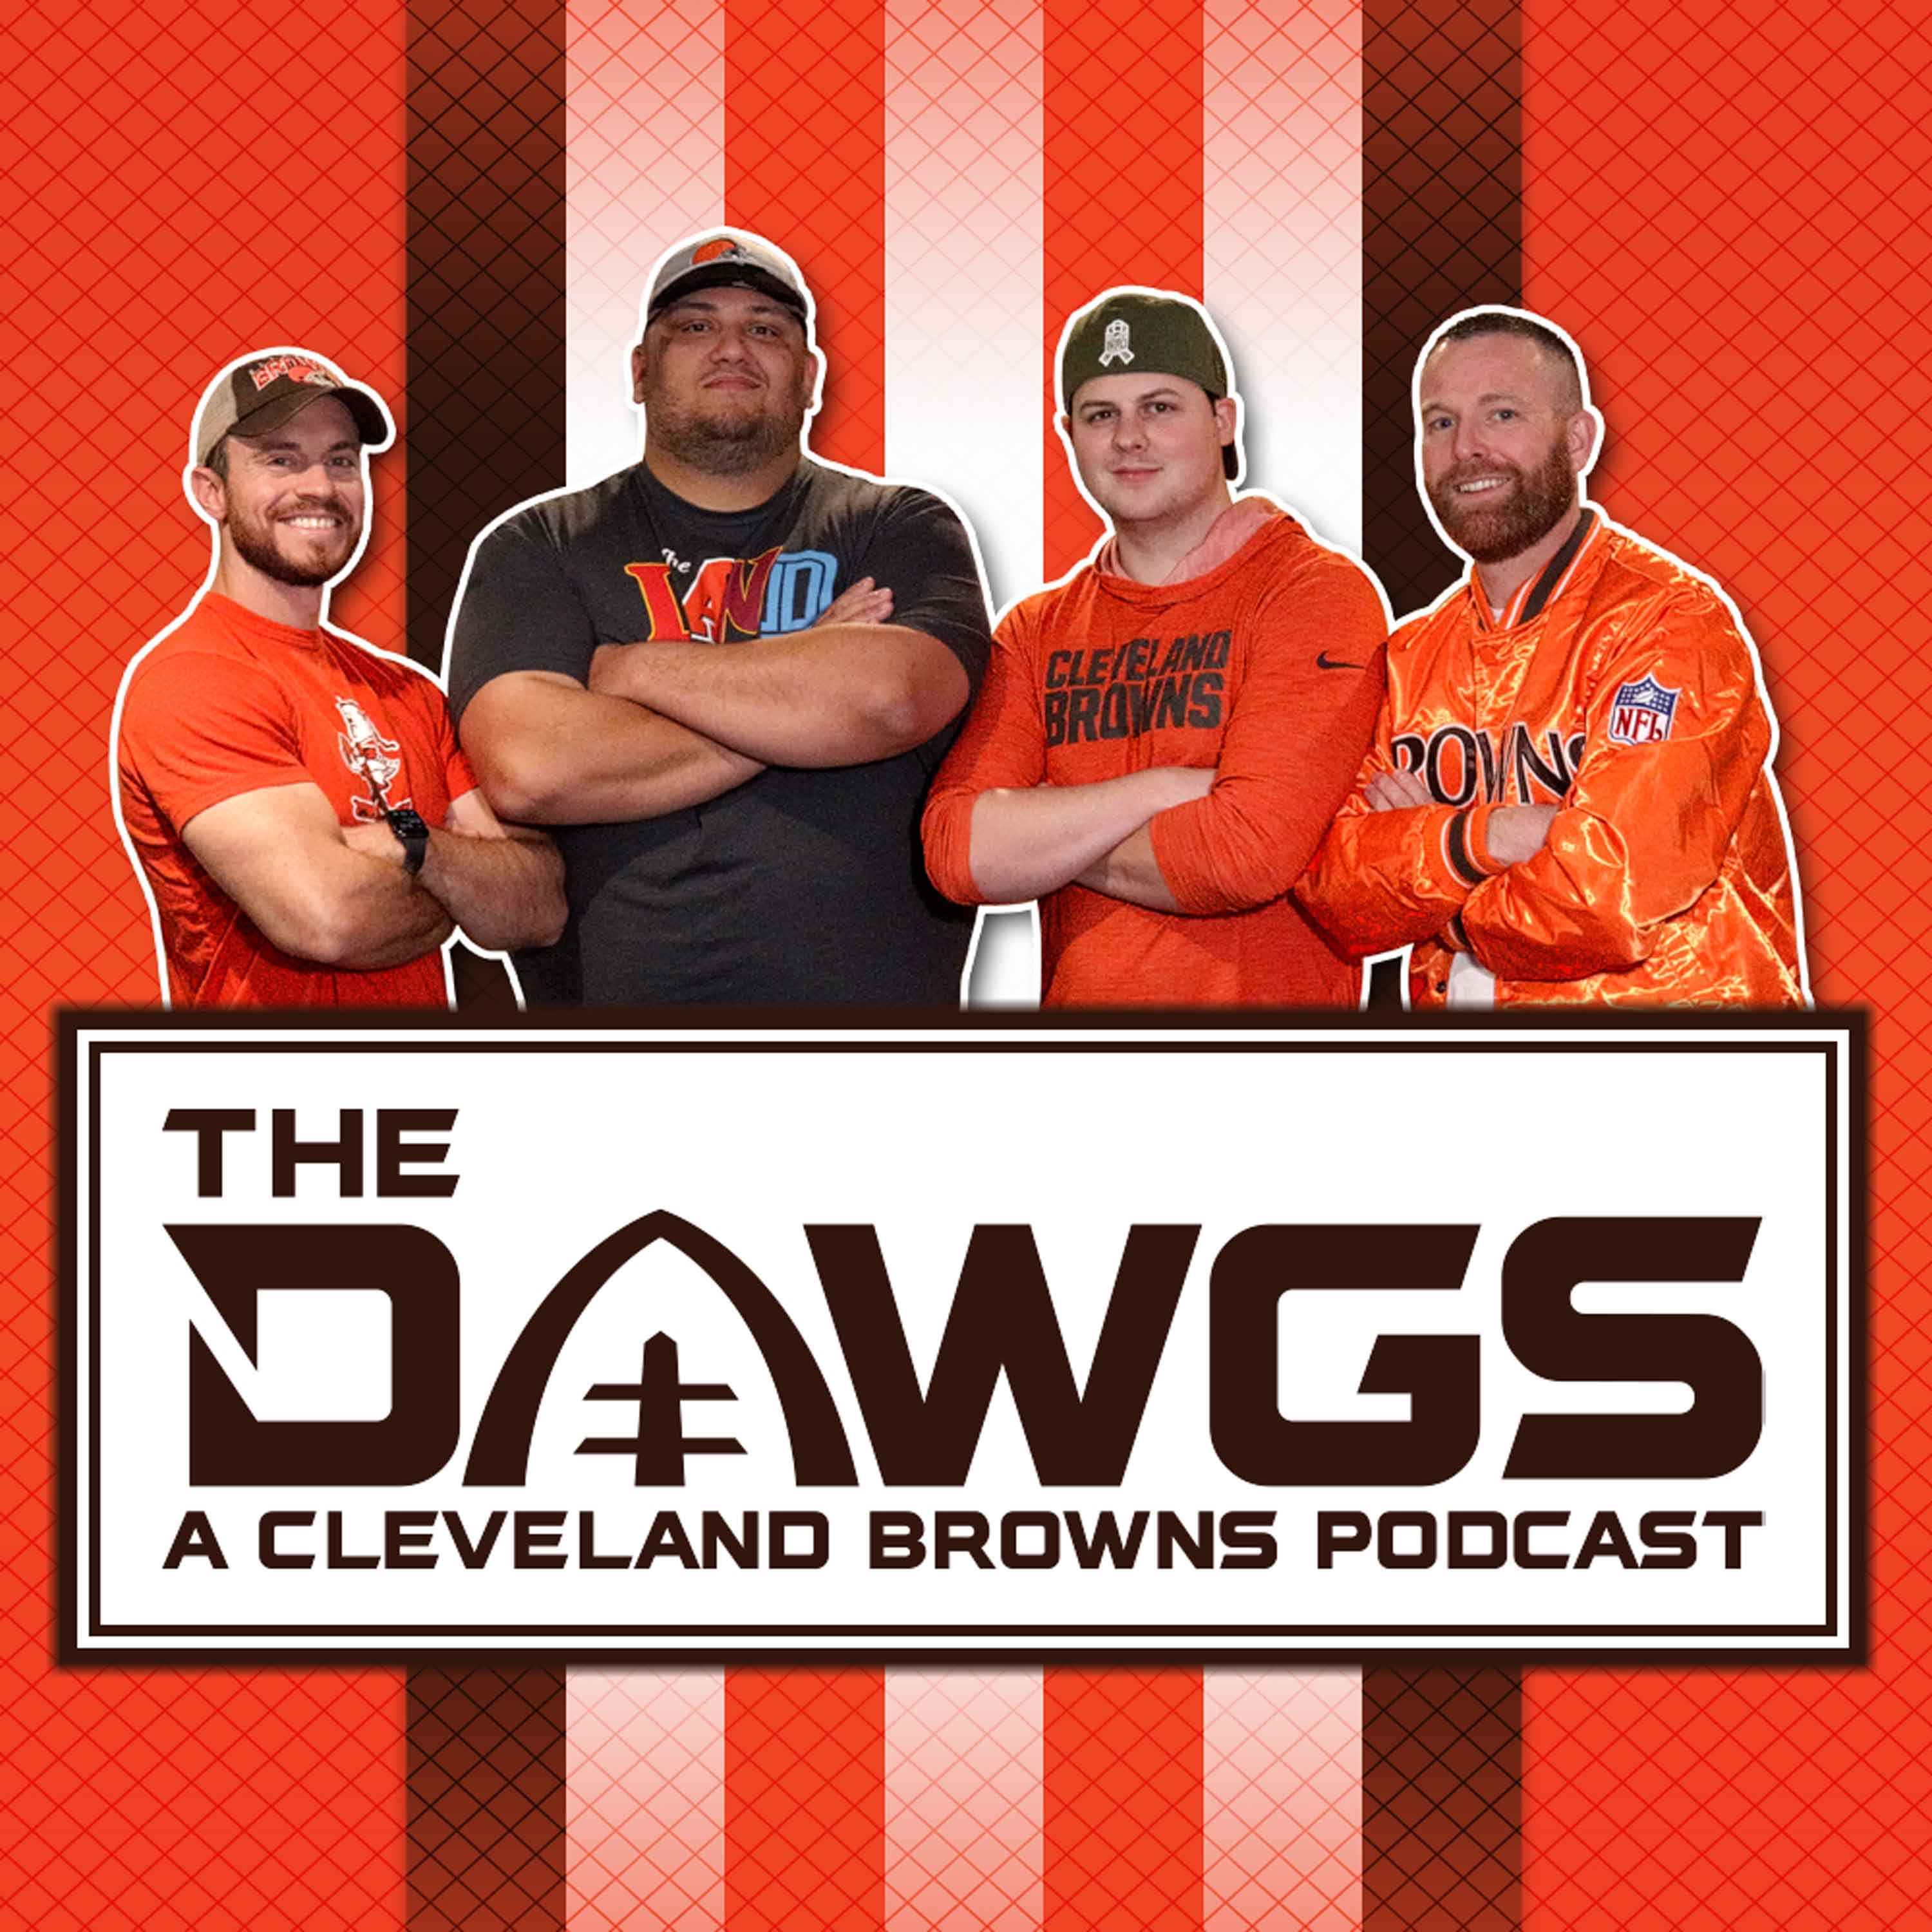 Week 17 Recap: The Browns Come Alive in Washington  | The Dawgs - A Cleveland Browns Podcast - January 4, 2023